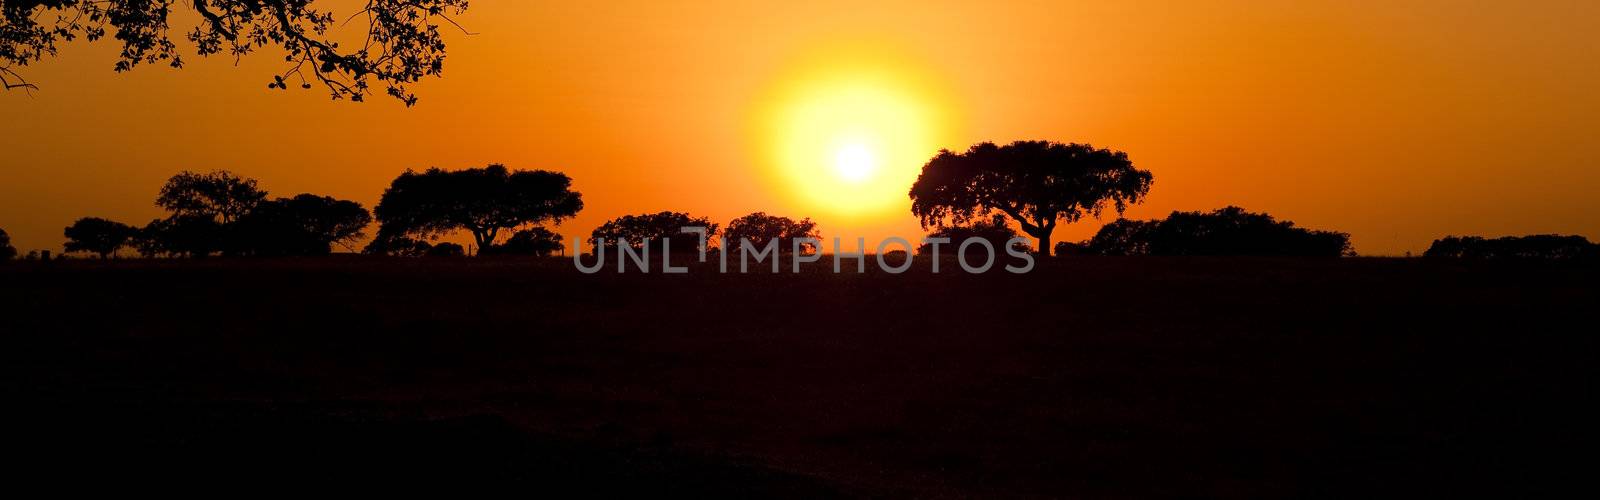 Beautiful landscape image with trees silhouette at sunset - Alentejo, Portugal
